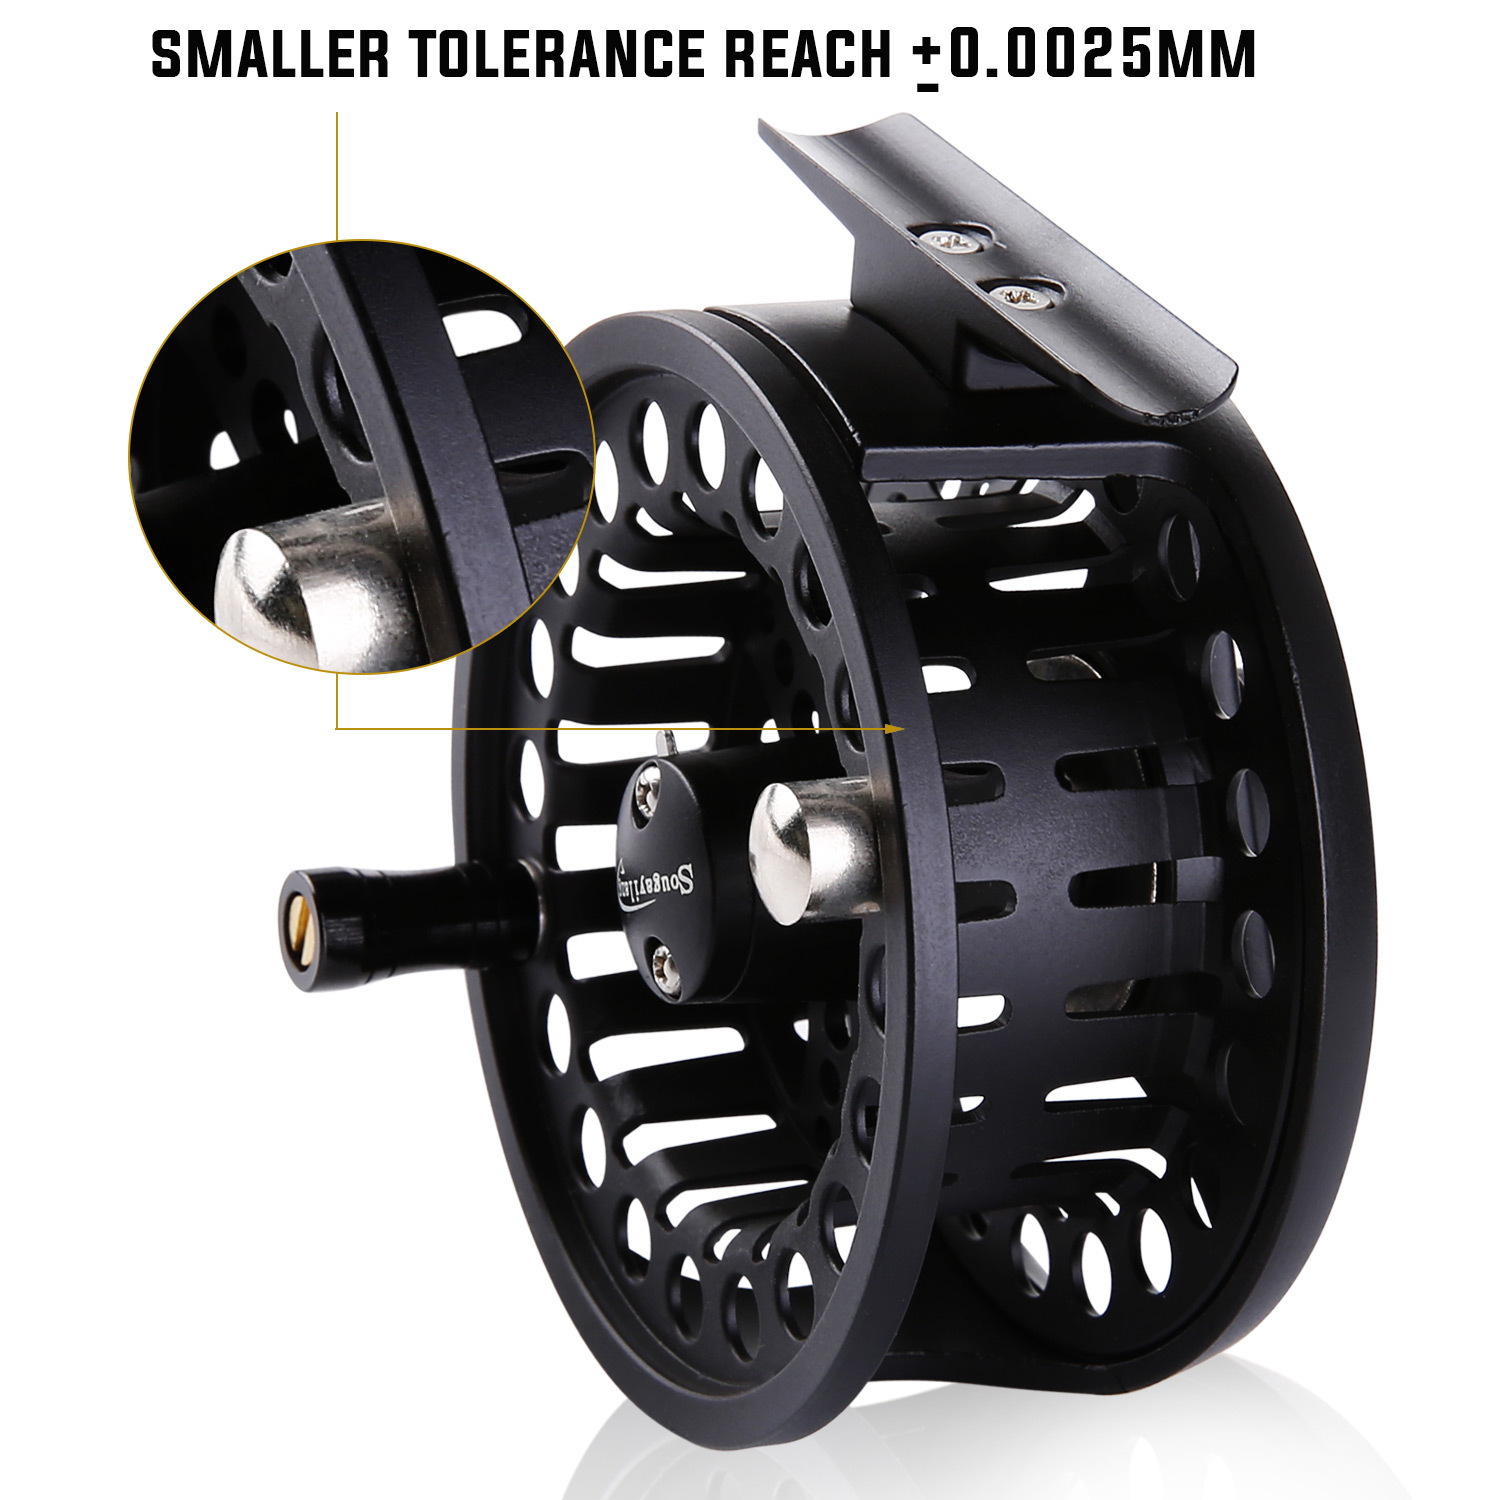  Fly Fishing Reel, 5/6 Line Multi-Purpose High Strength Reels, Fly  Fishing Reel with Left Or Right Hand Retrieve, Bearing Large Arbor for Fast  Line Pick Up, Corrosion Resistance Coated 